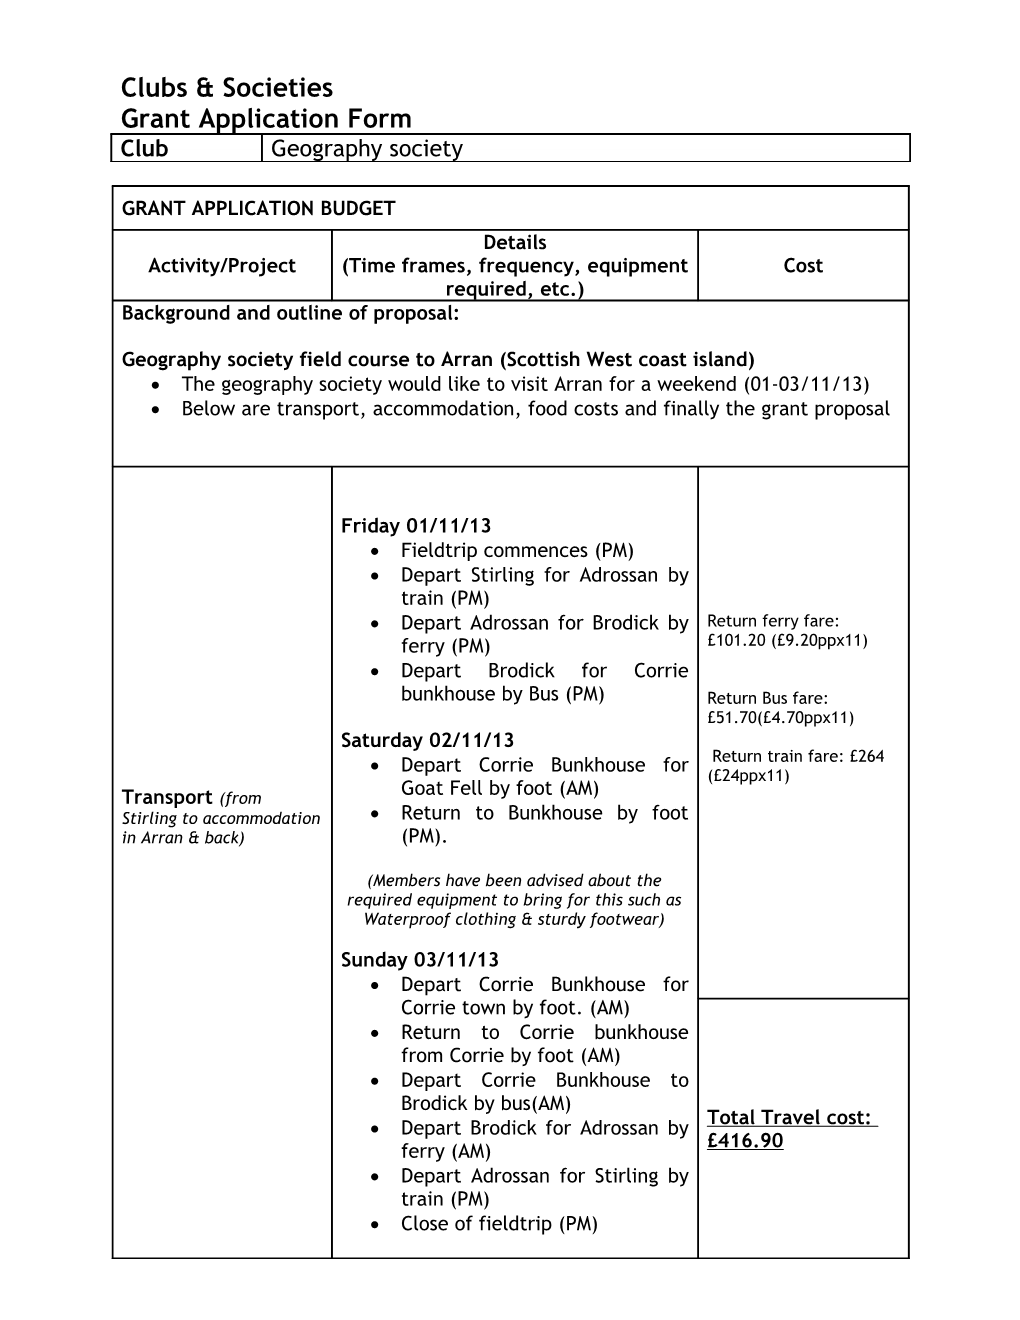 Clubs & Societies Grant Request Form 2004/2005